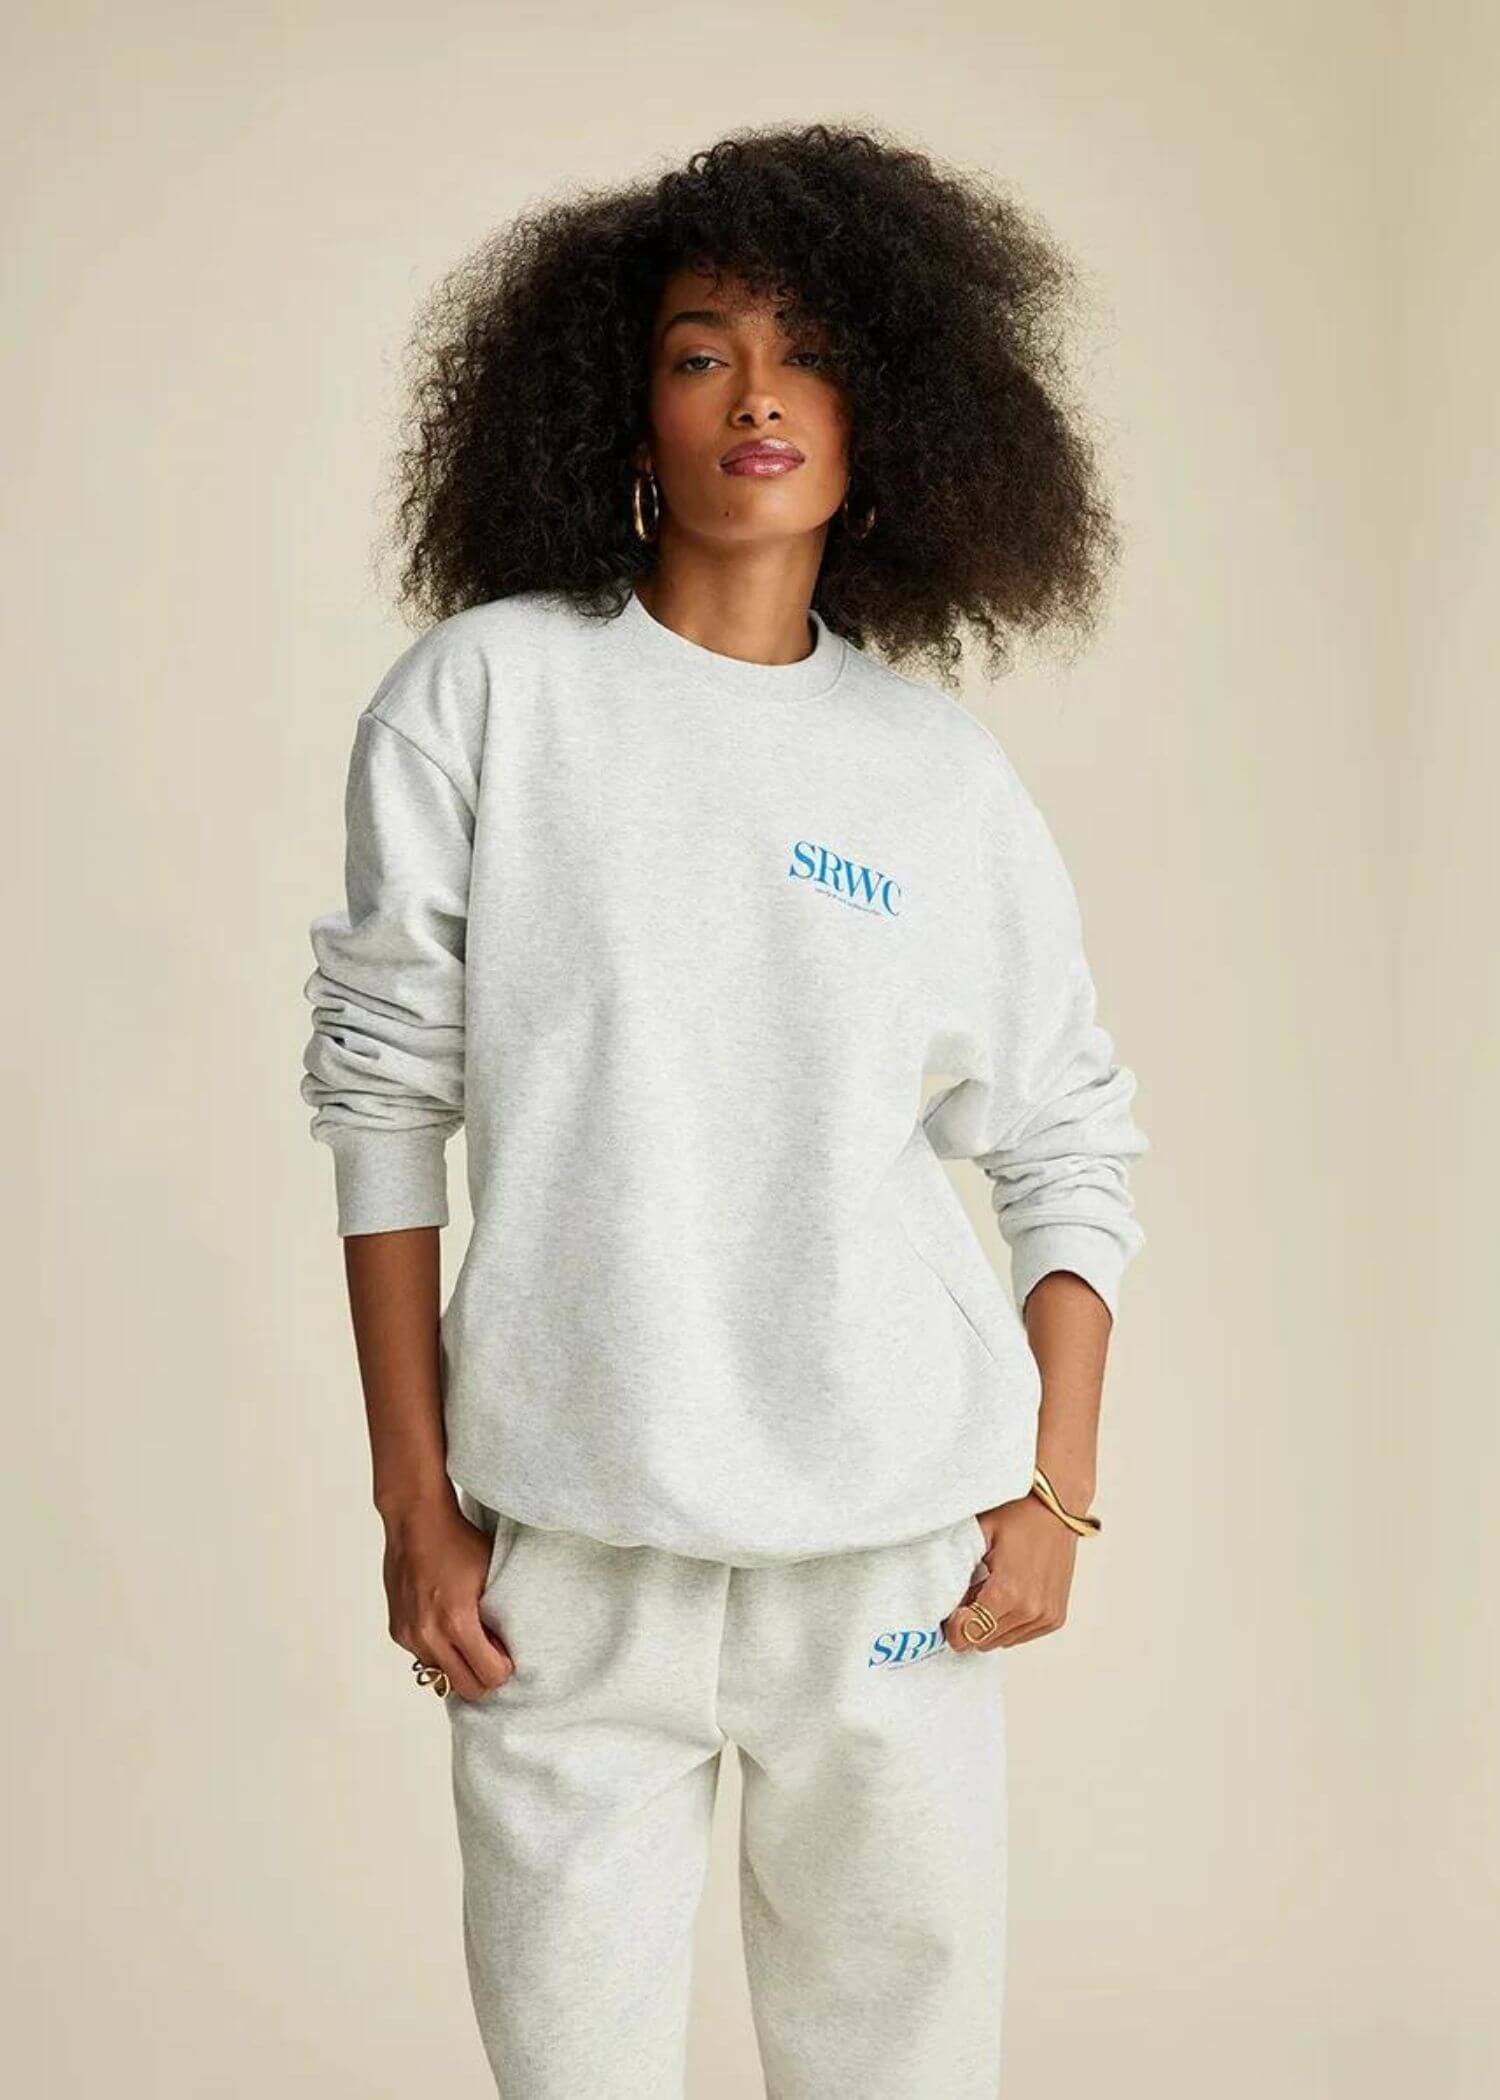 Personality Crewneck Sweatshirt miteigi activewear Women’s SRWC Sporty and Rich Wellness Club Letter Print Personality Comfortable Casual Pullovers Round o-neck crew neck Sweaters for woman in light Gray grey Spring summer womens fitness sportswear fashion season clothing